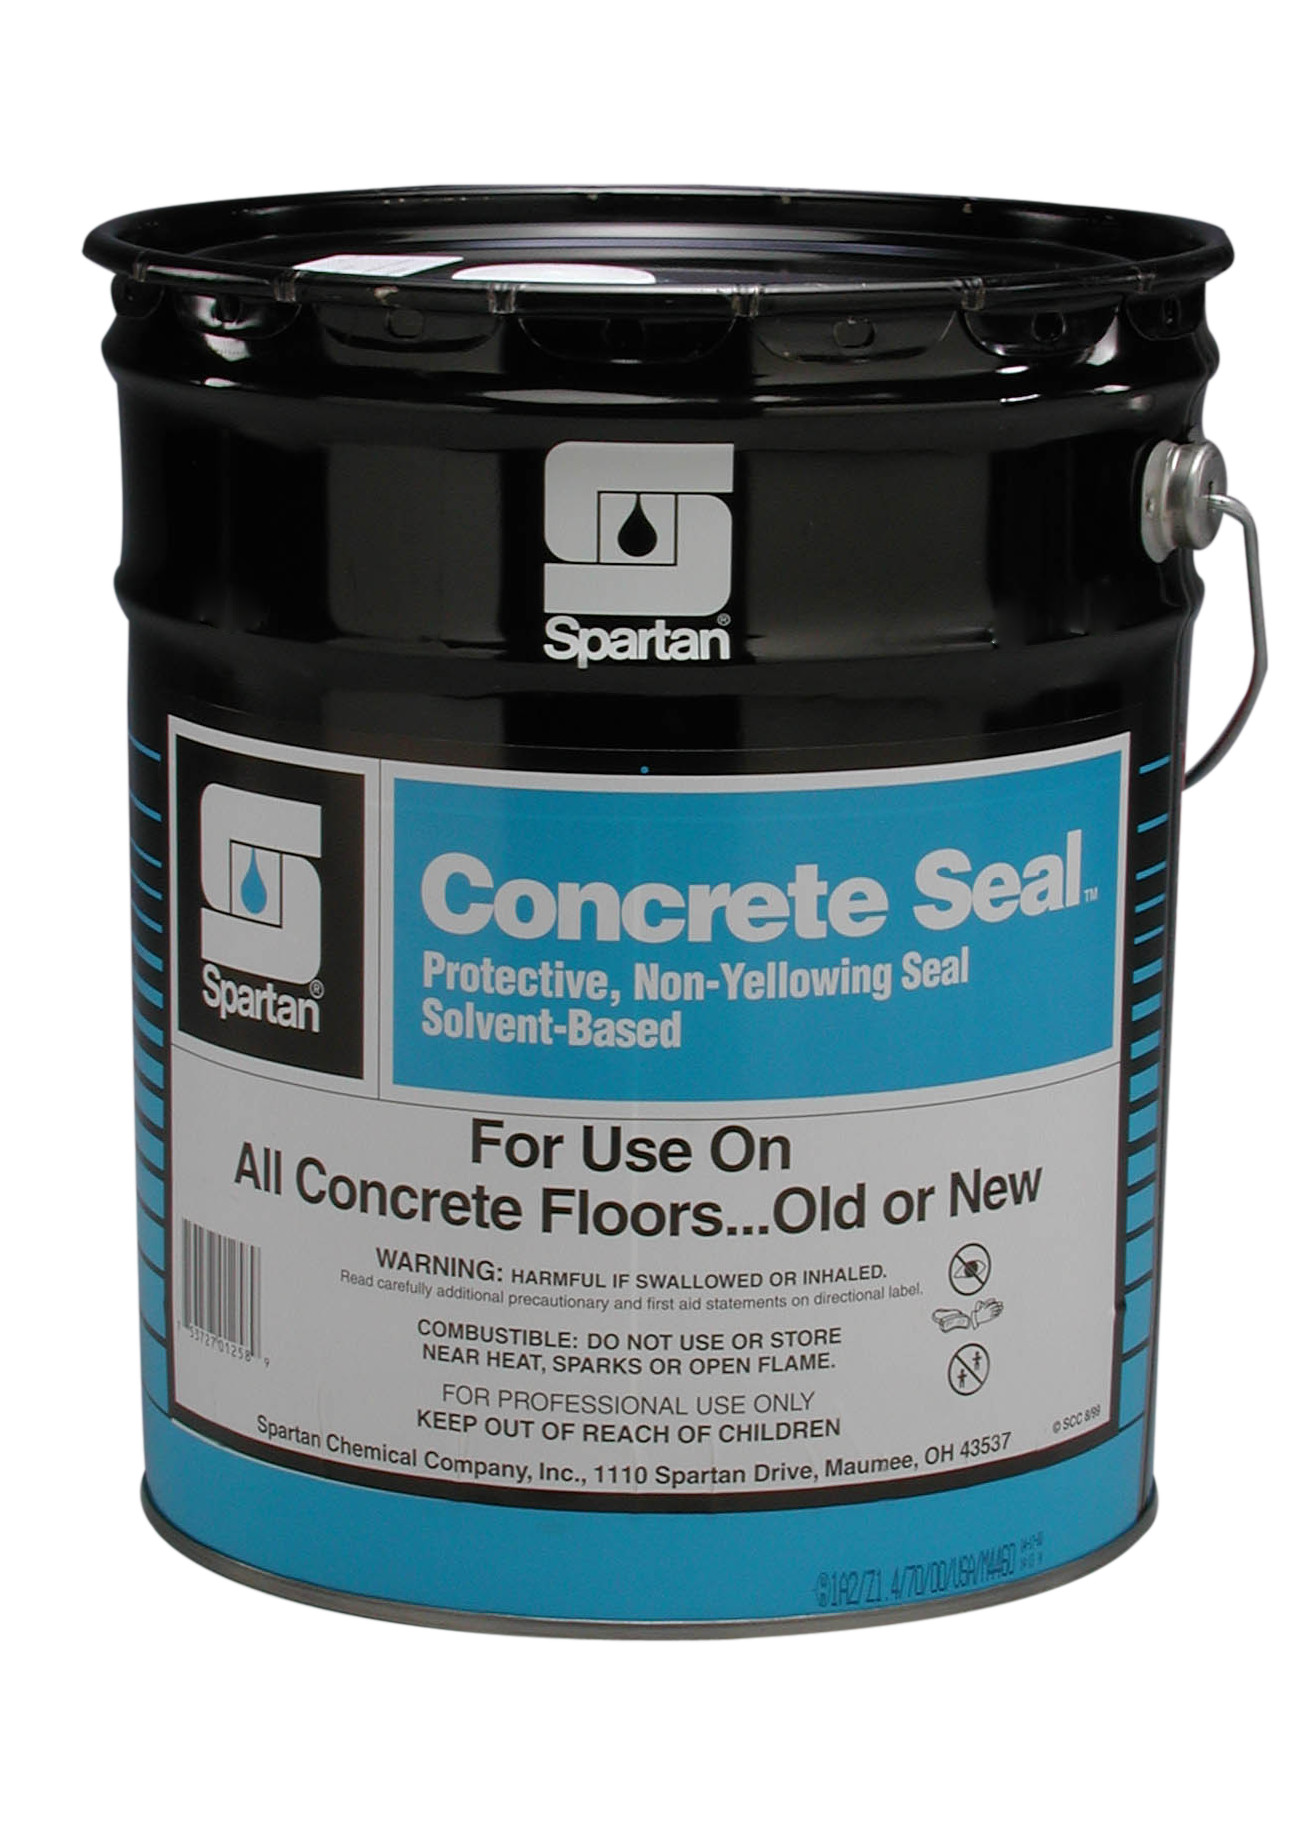 Spartan Chemical Company Concrete Seal, 5 GAL STEEL